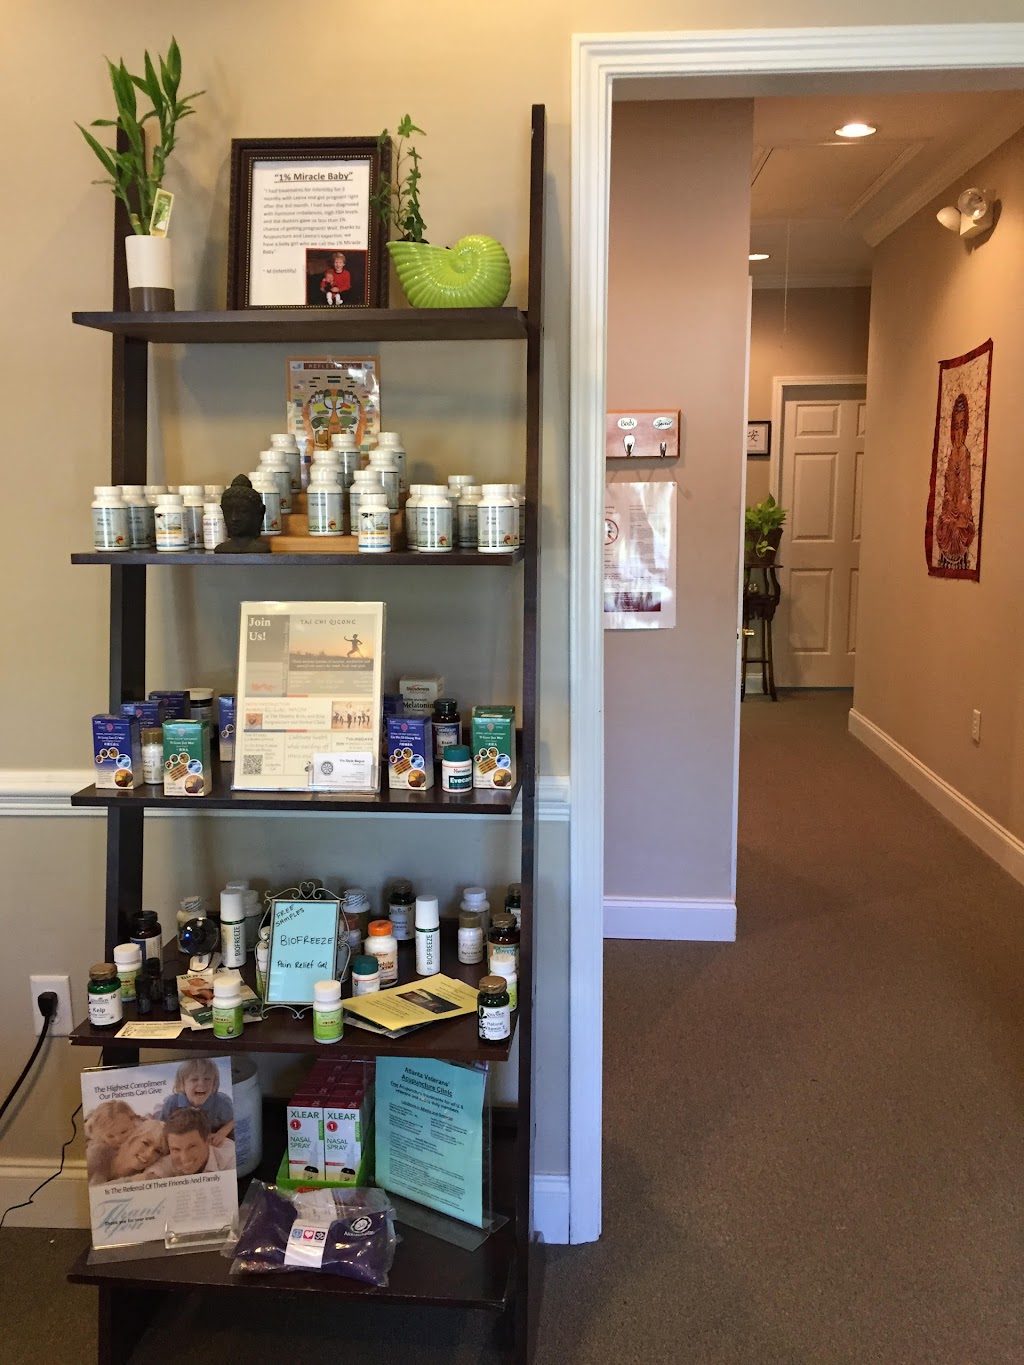 Healthy Body and Soul, Acupuncture and Herbal Clinic | 3465 Lawrenceville-Suwanee Rd c, Suwanee, GA 30024 | Phone: (470) 266-1550